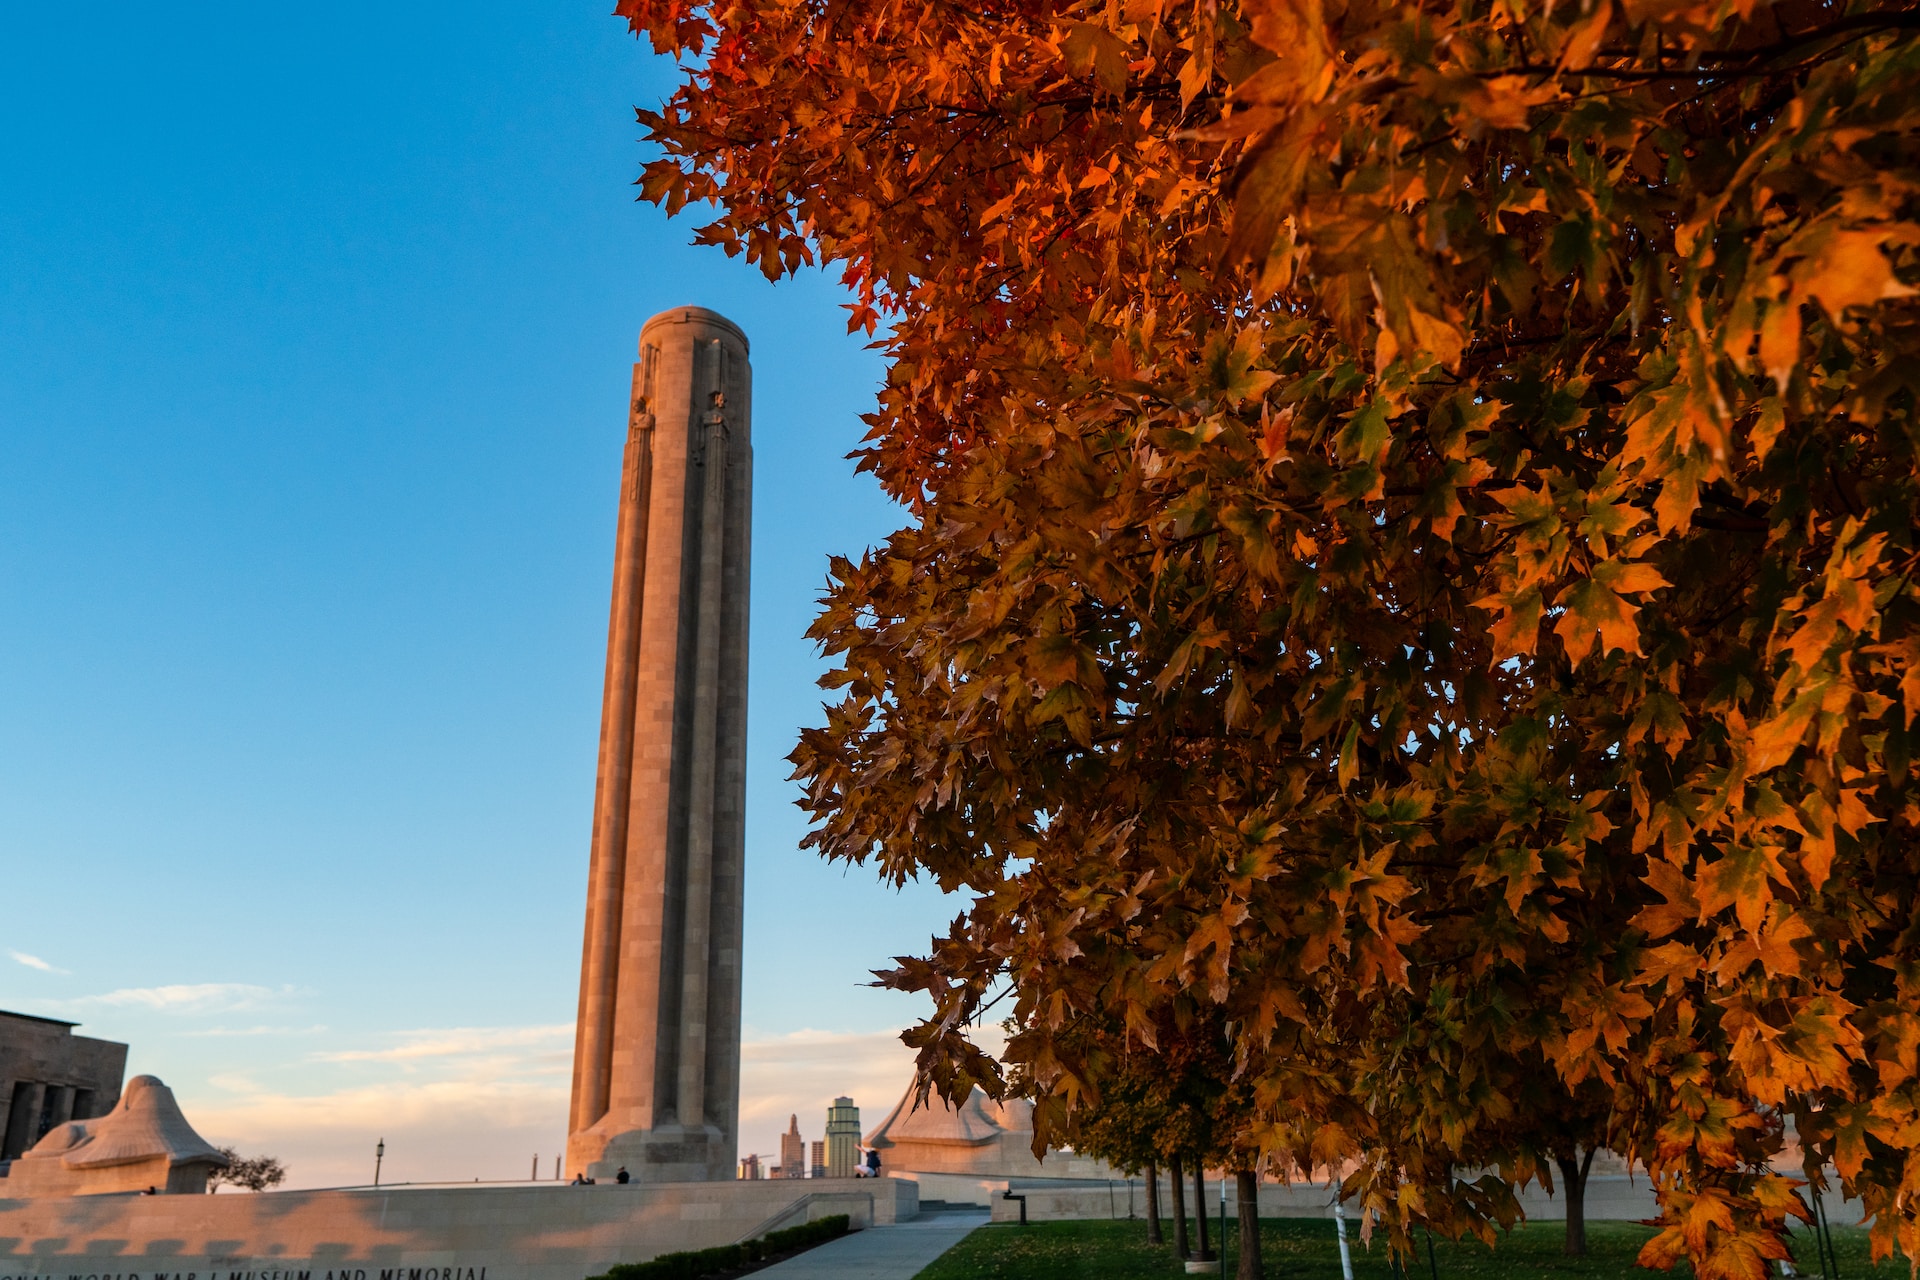 An autumn day in Kansas City at the World War 1 Memorial and Museum with the leaves changing colors.